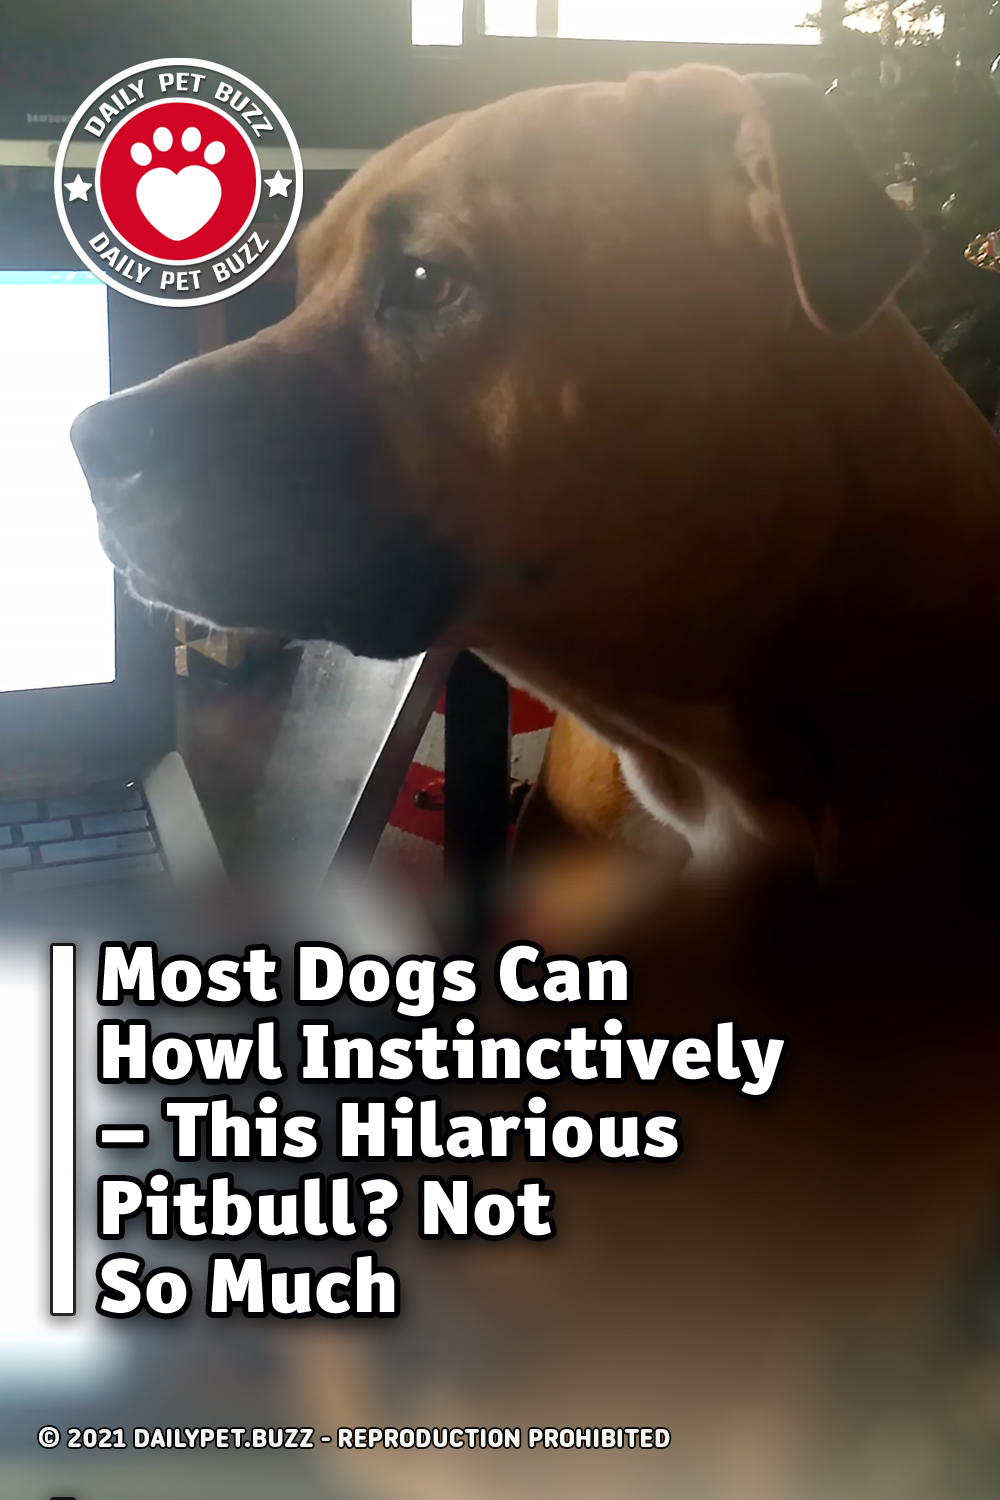 Most Dogs Can Howl Instinctively – This Hilarious Pitbull? Not So Much